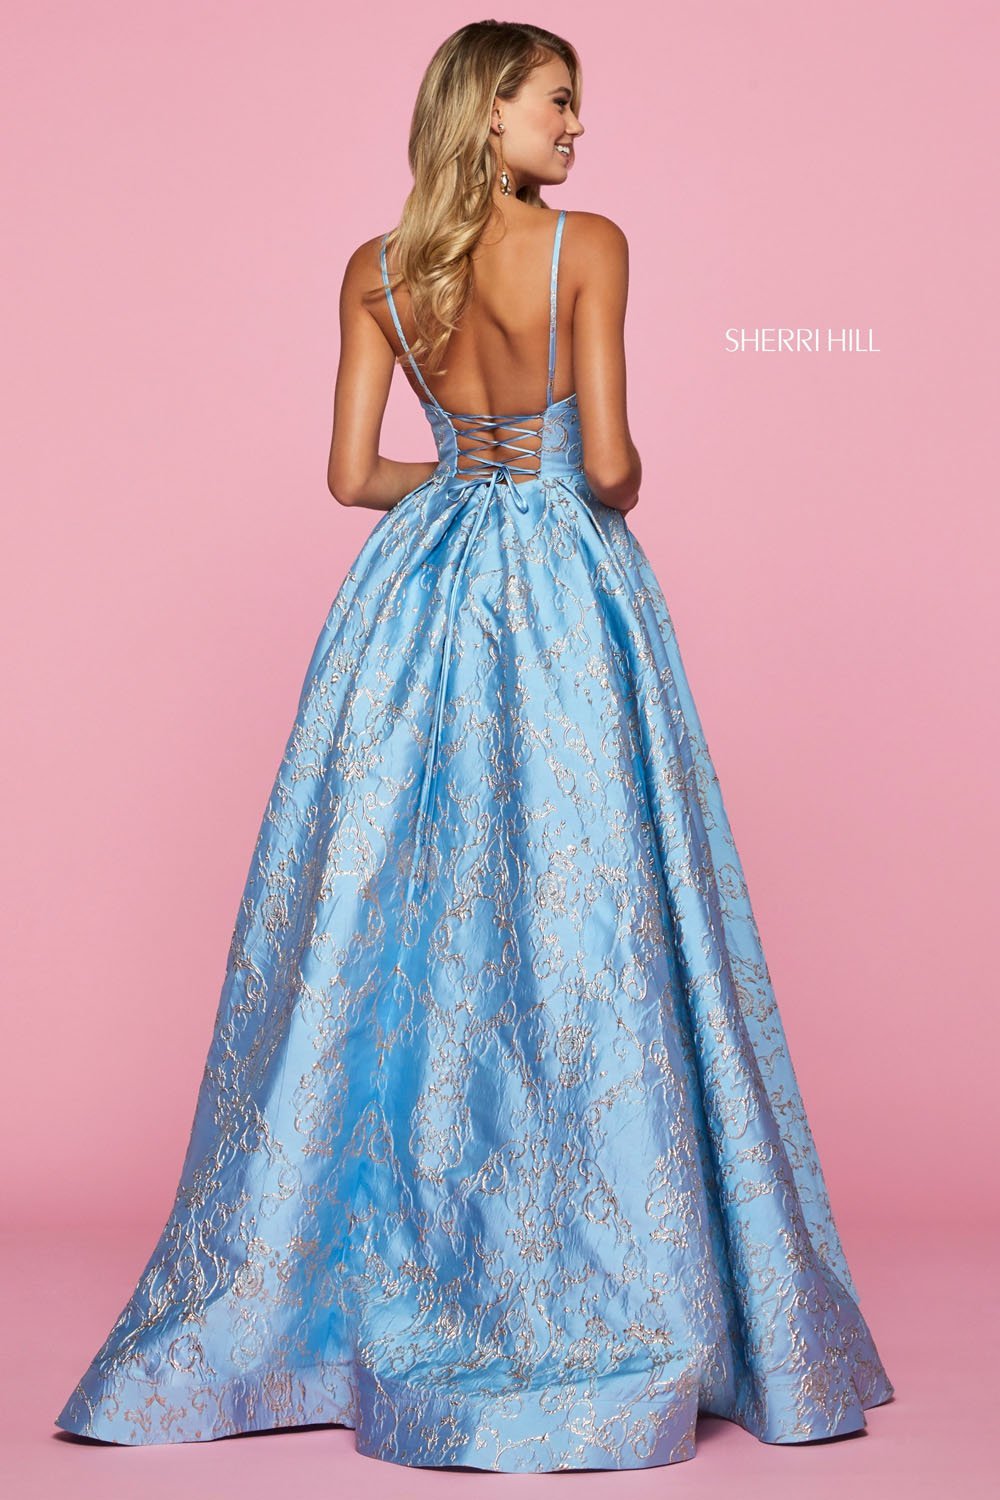 Sherri Hill 53328 dress images in these colors: Rose, Light Blue, Lilac.